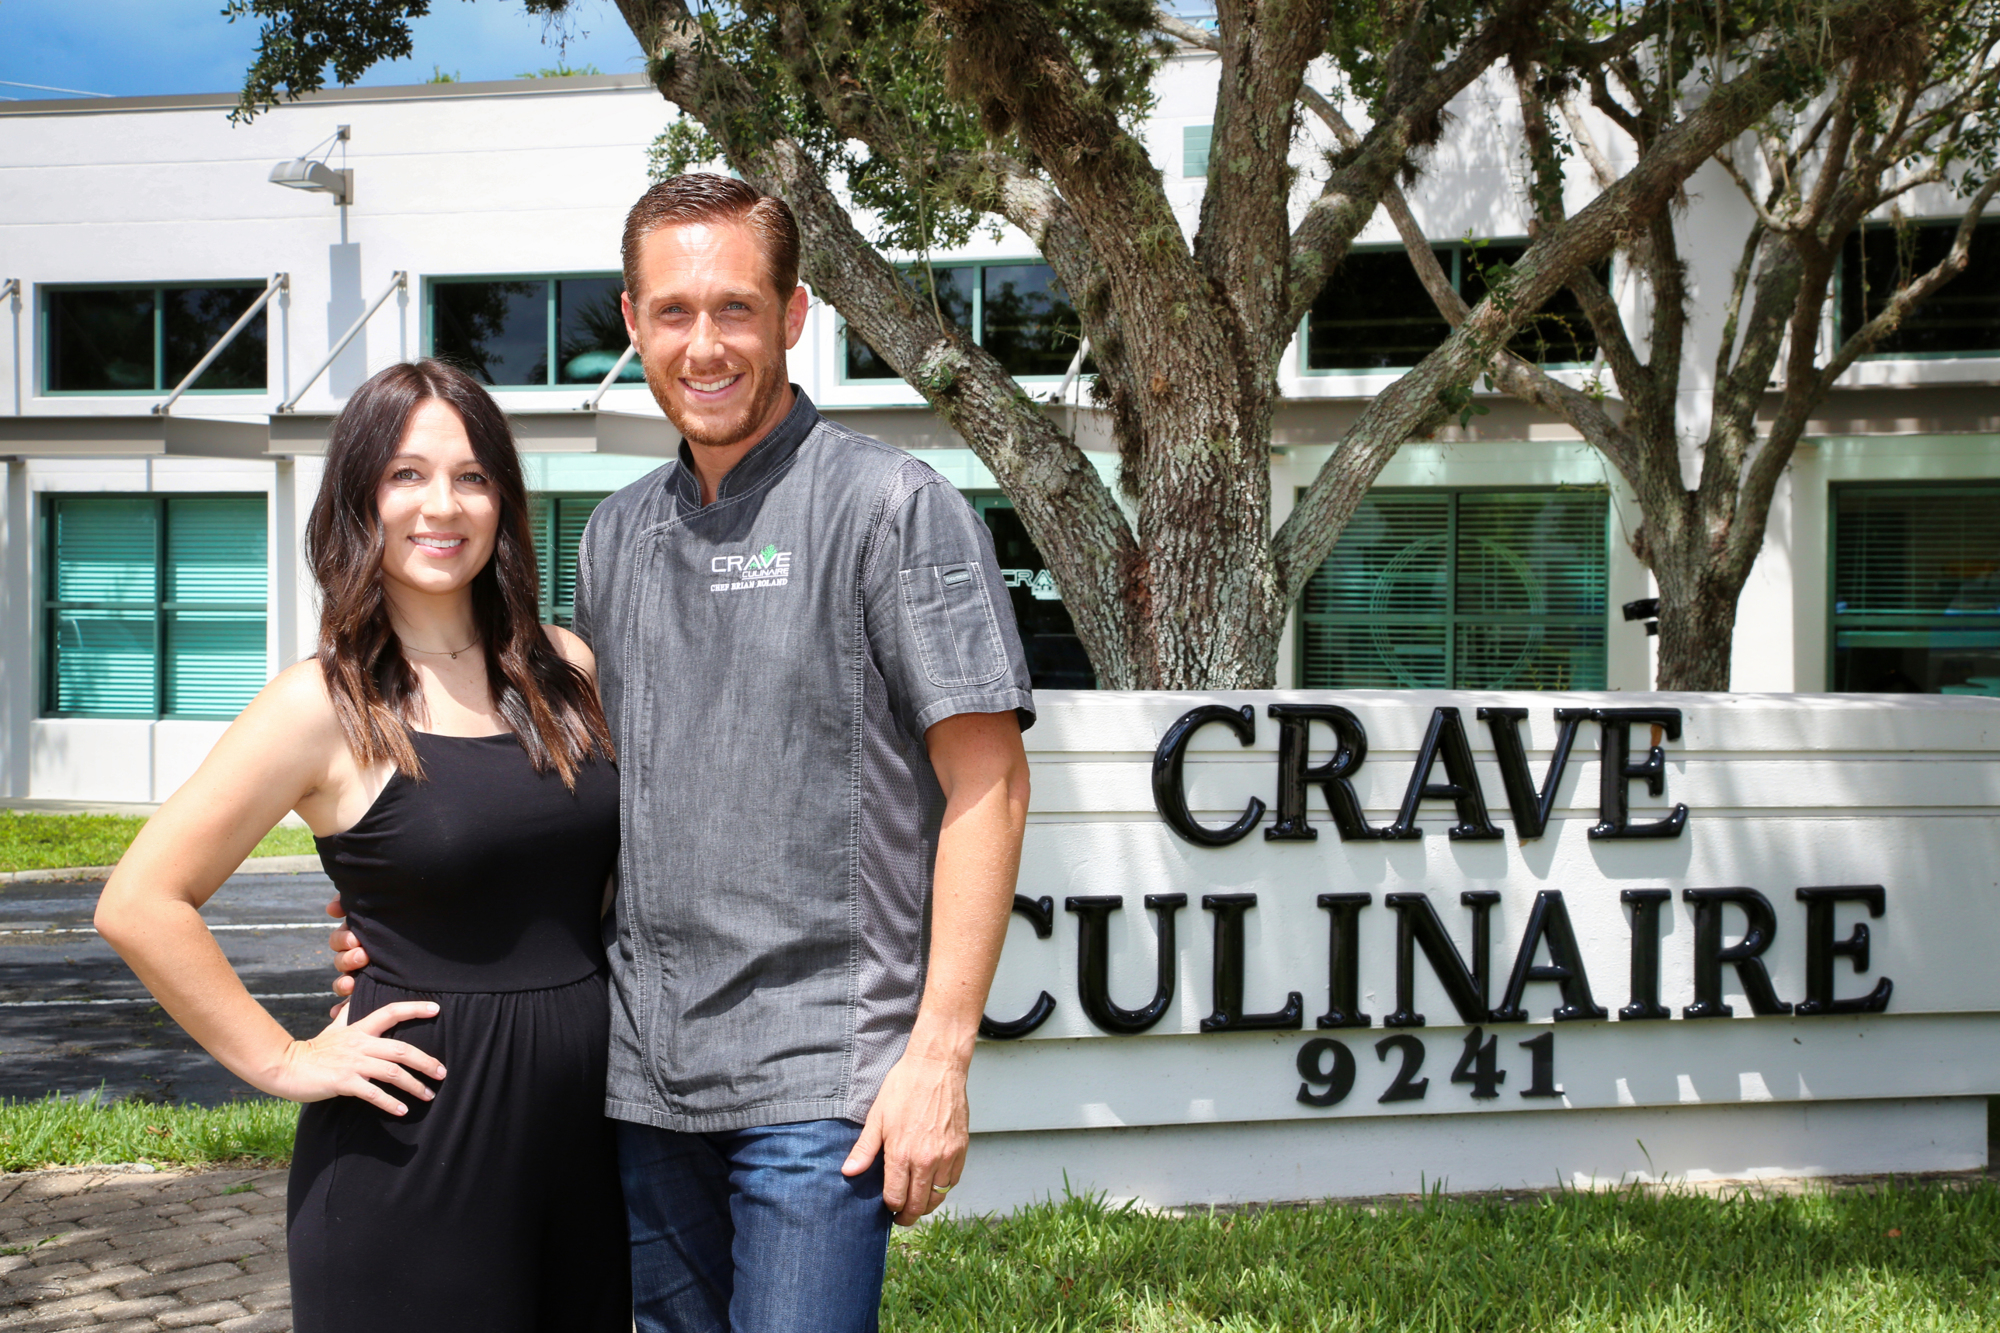 Stefania Pifferi. Brian and Nicole Roland founded Crave Culinaire in 2013.